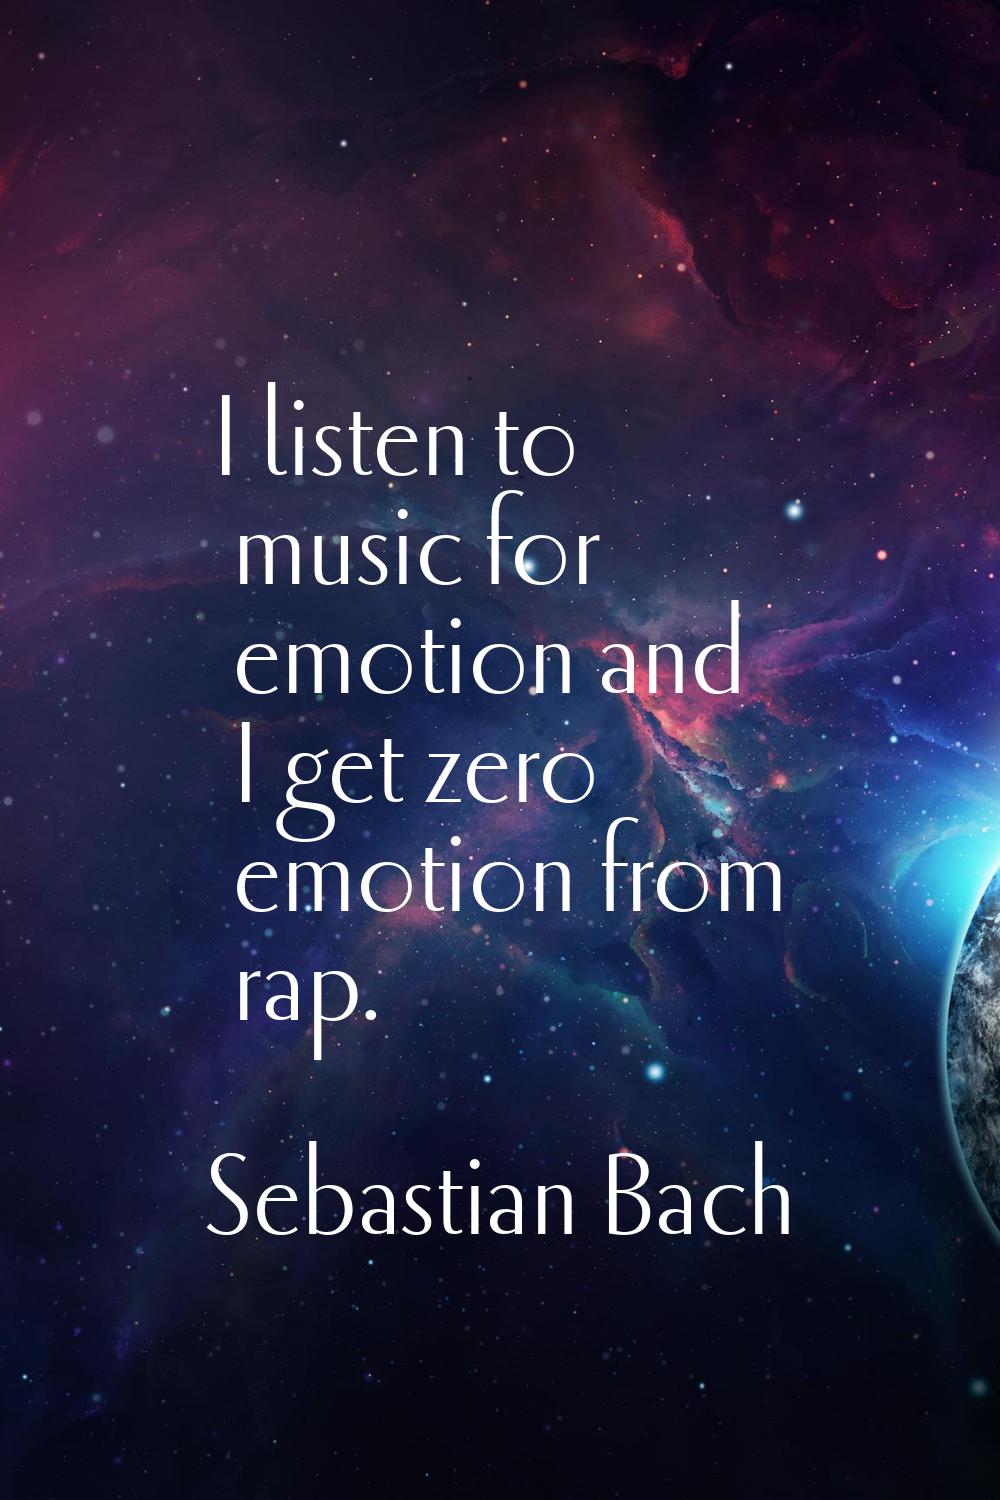 I listen to music for emotion and I get zero emotion from rap.